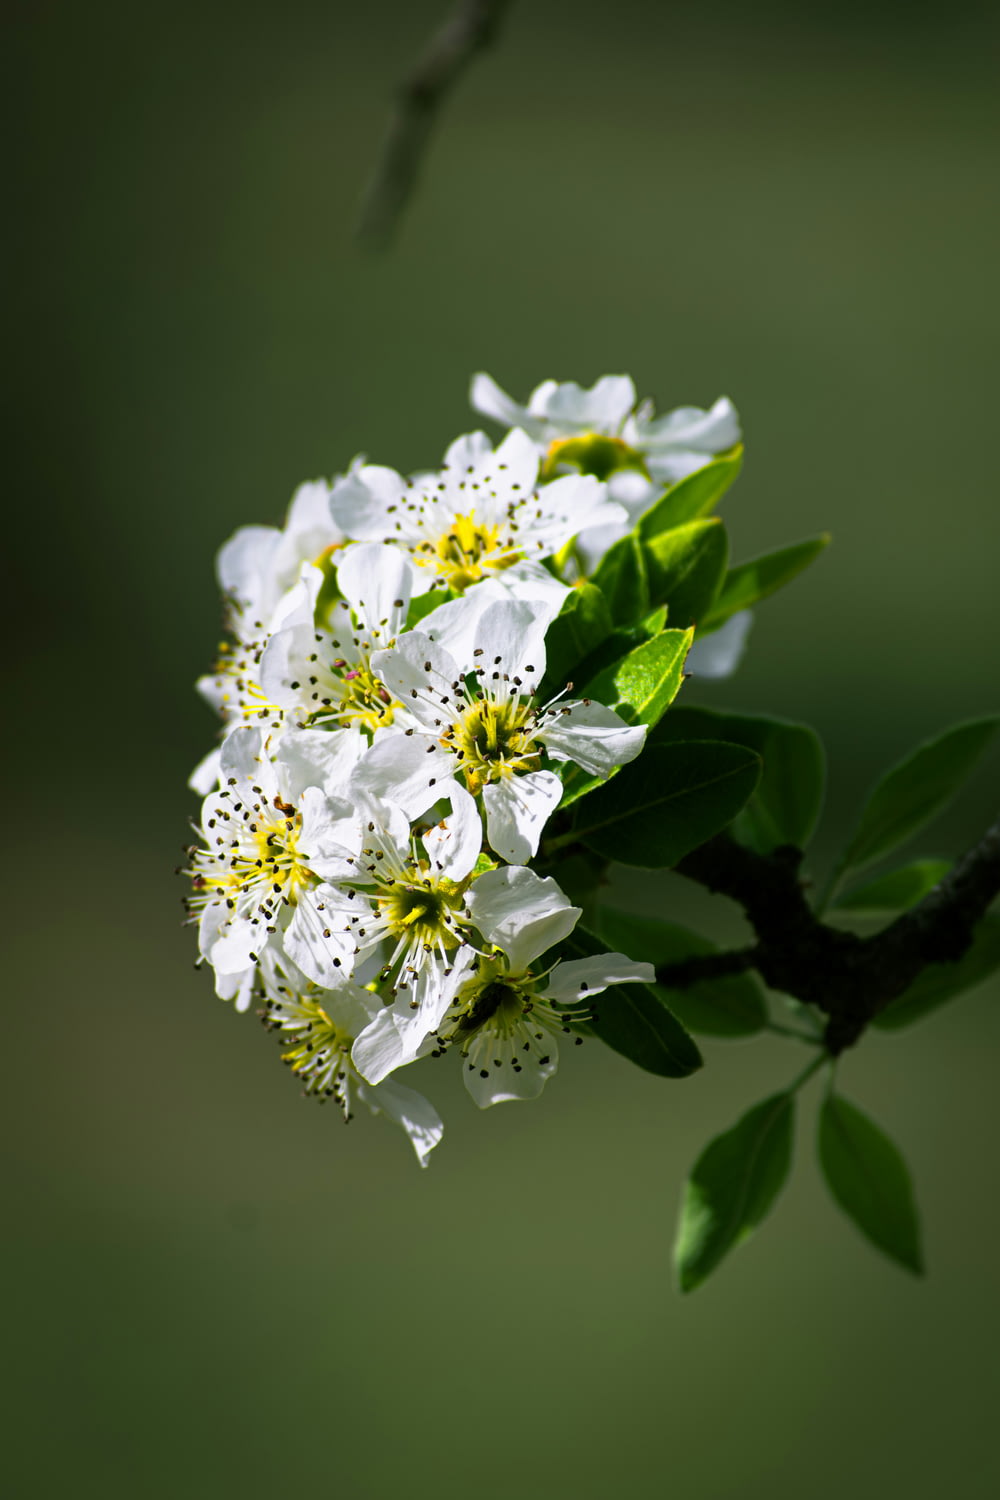 a close up of a white flower on a tree branch